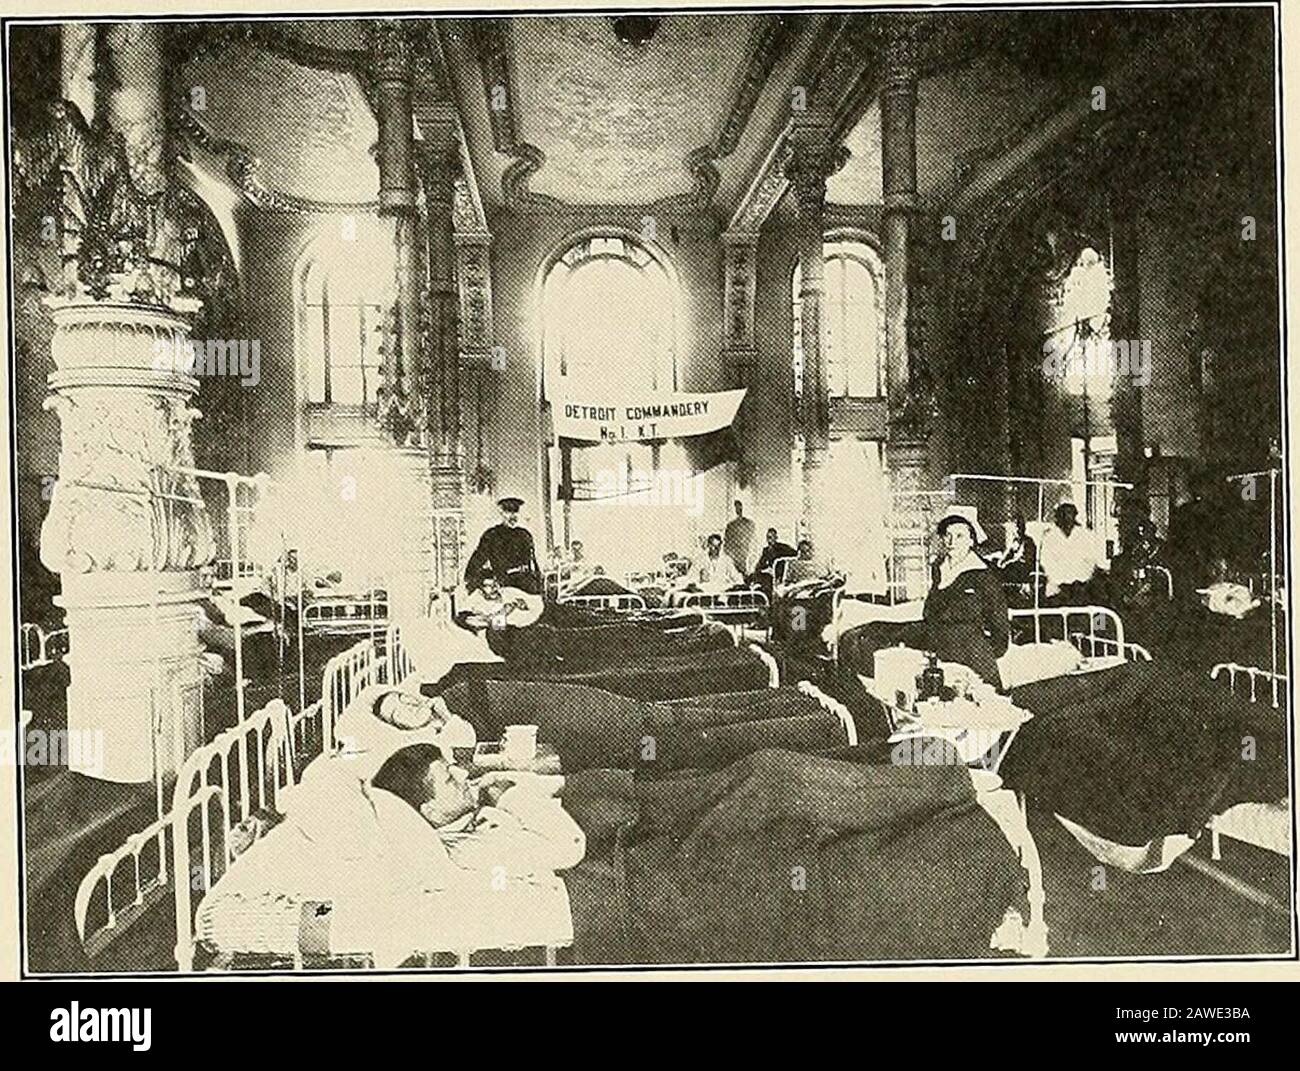 A history of United States Army Base Hospital No36 (Detroit College of Medicine and Surgery Unit) organized at Detroit, Michigan, April 11th, 1917 . Officers Morning Conference, Hospital B. Dining Room of Ceres Hotel in Peace Time.. Large Surgical Ward, Hospital B, Opened with ppGassed Soldiers. March 18th, 1918, Major Goldthwaite called and stated that the plans to make of HospitalB an exclusive bone and joint hospital for the advance section would not be carried out.Accordingly the officers detailed from Unit 23 were recalled and Lieutenant Grimes alsotook leave March 29th, 1918, Lieutenant Stock Photo